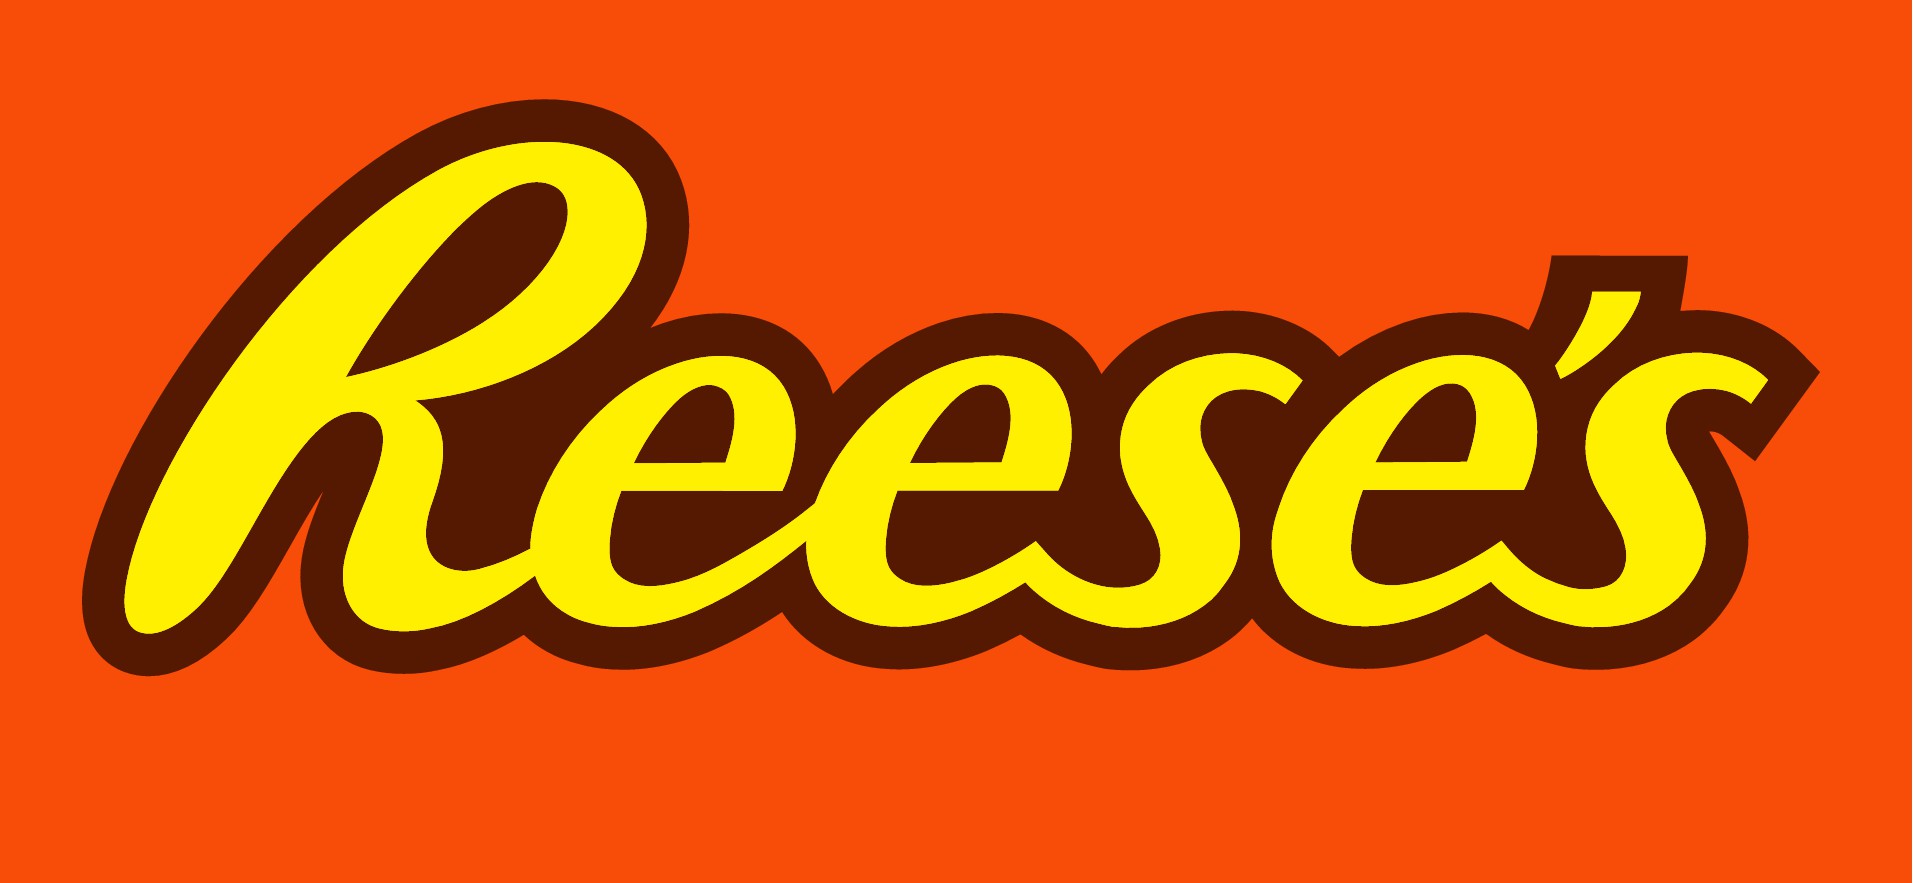 Reeses's